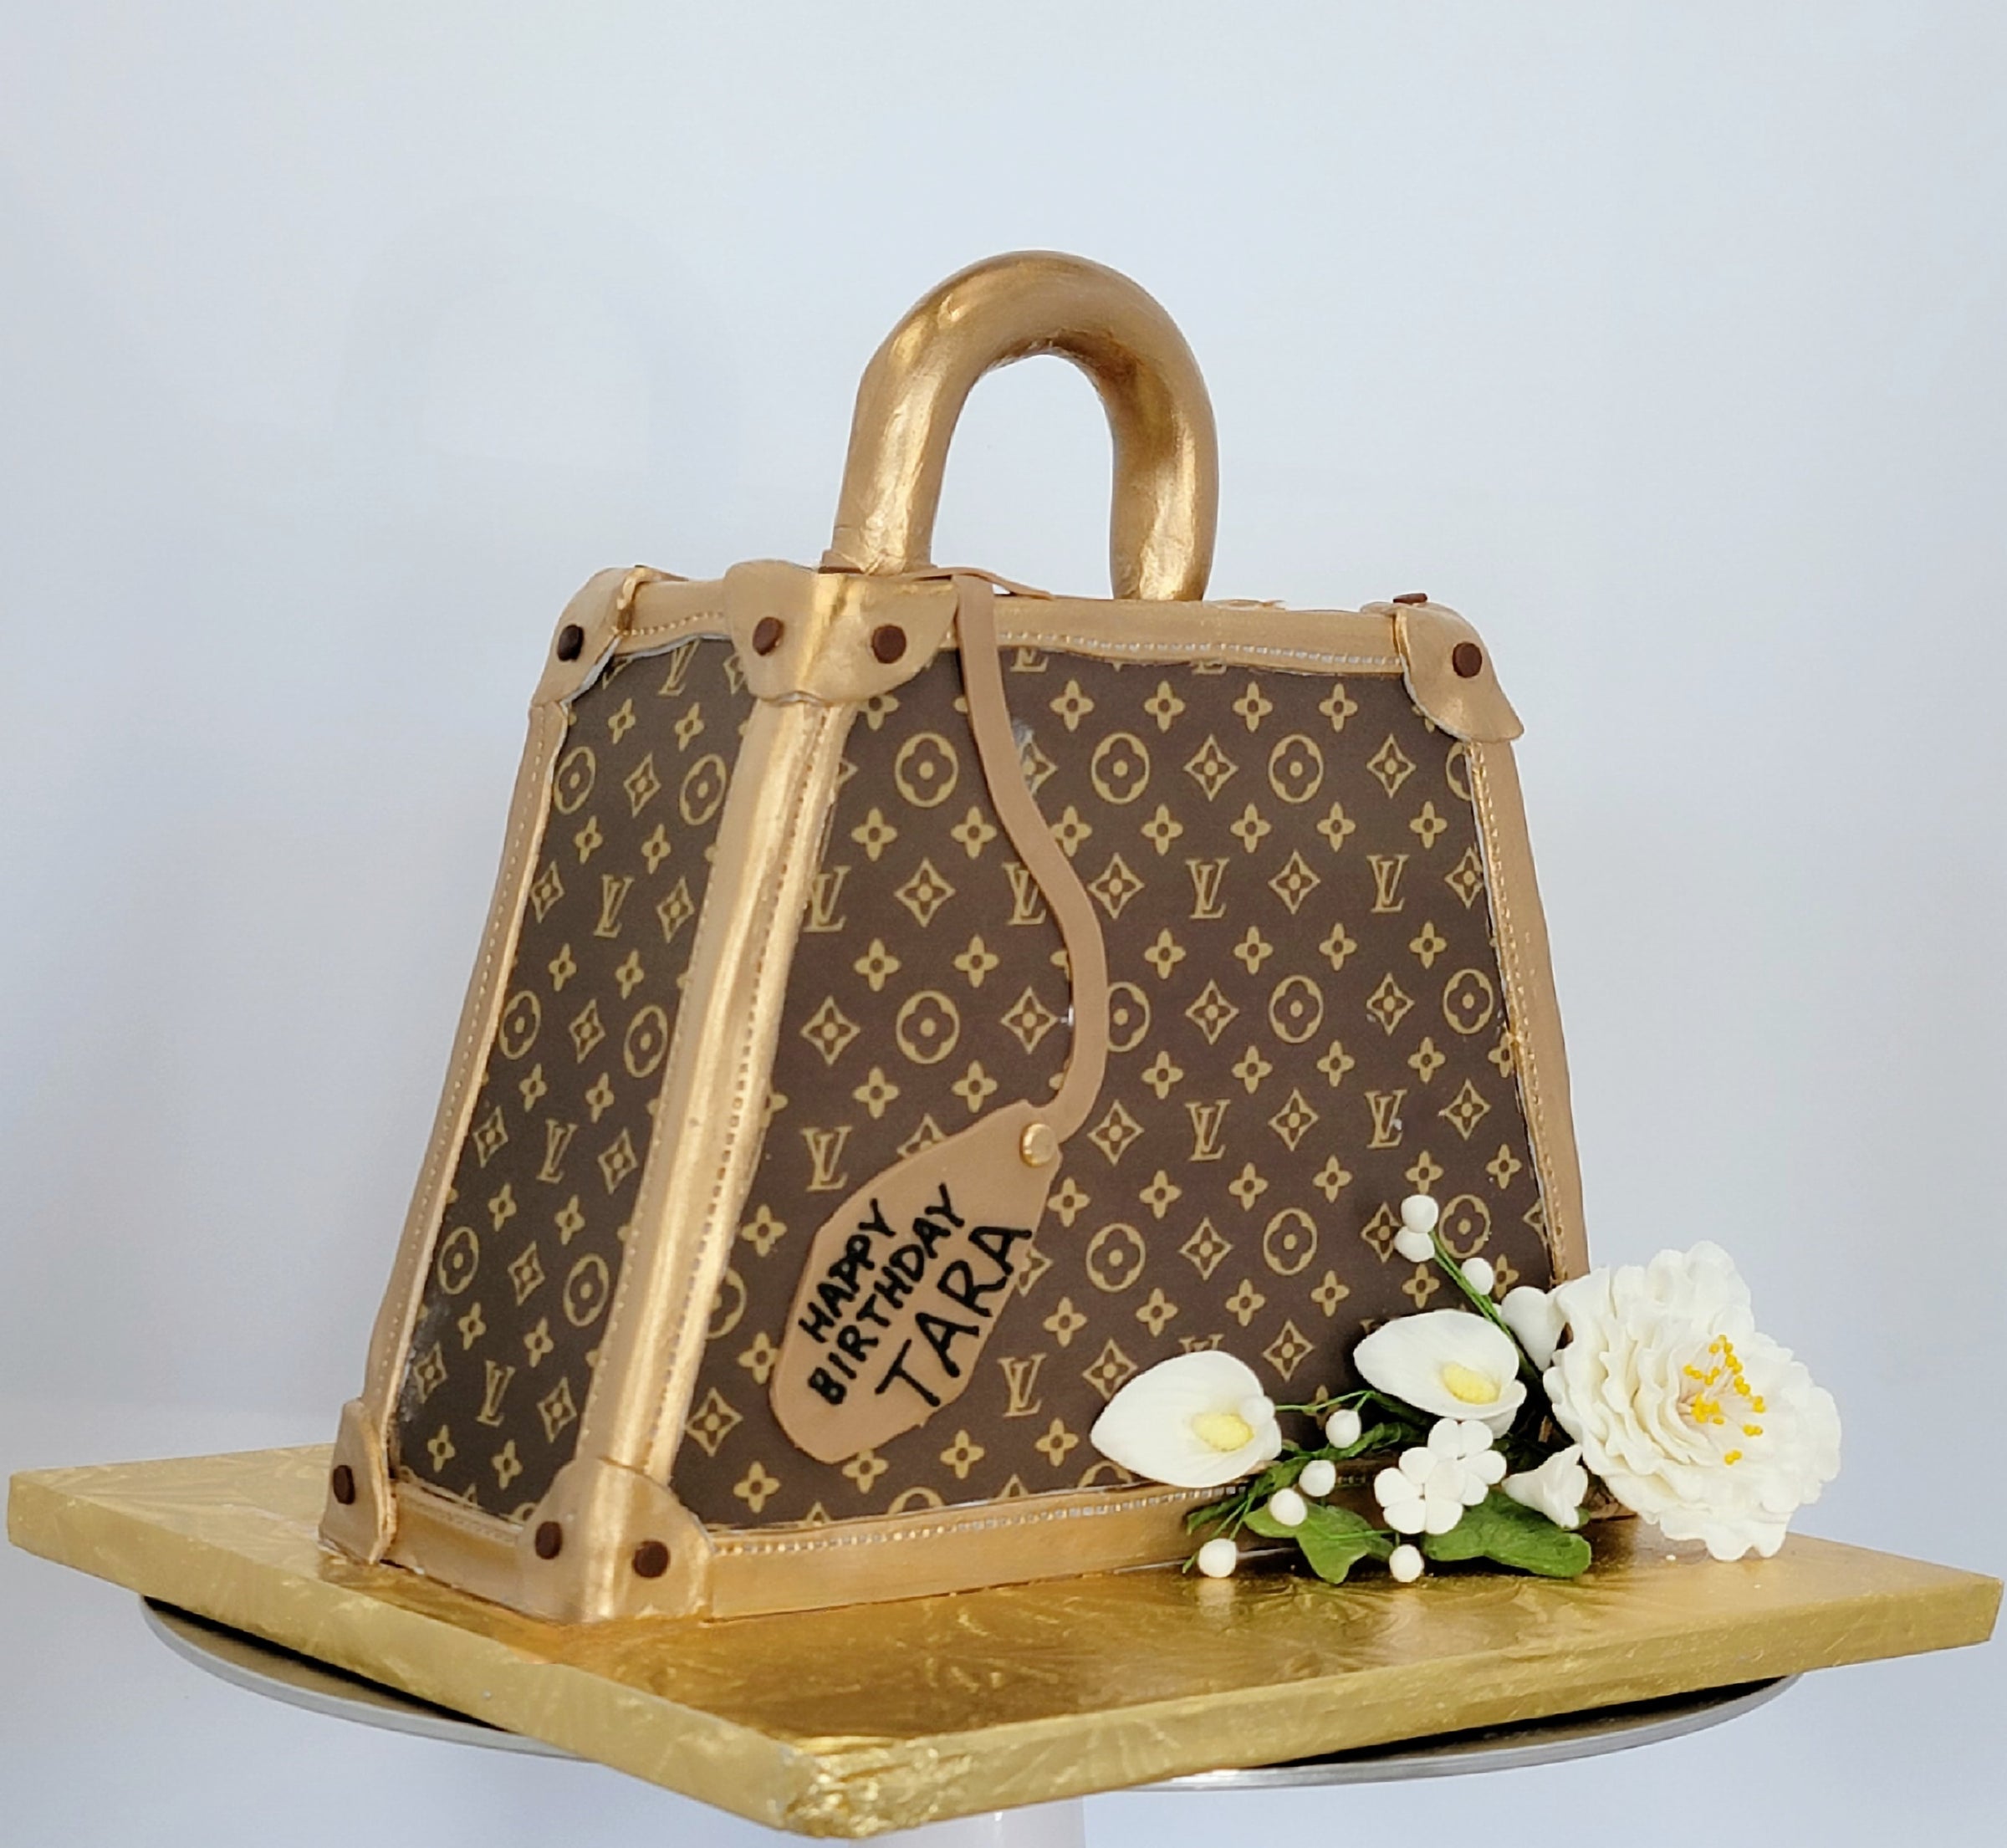 Louis Vuitton Briefcase shaped cake in brown & gold